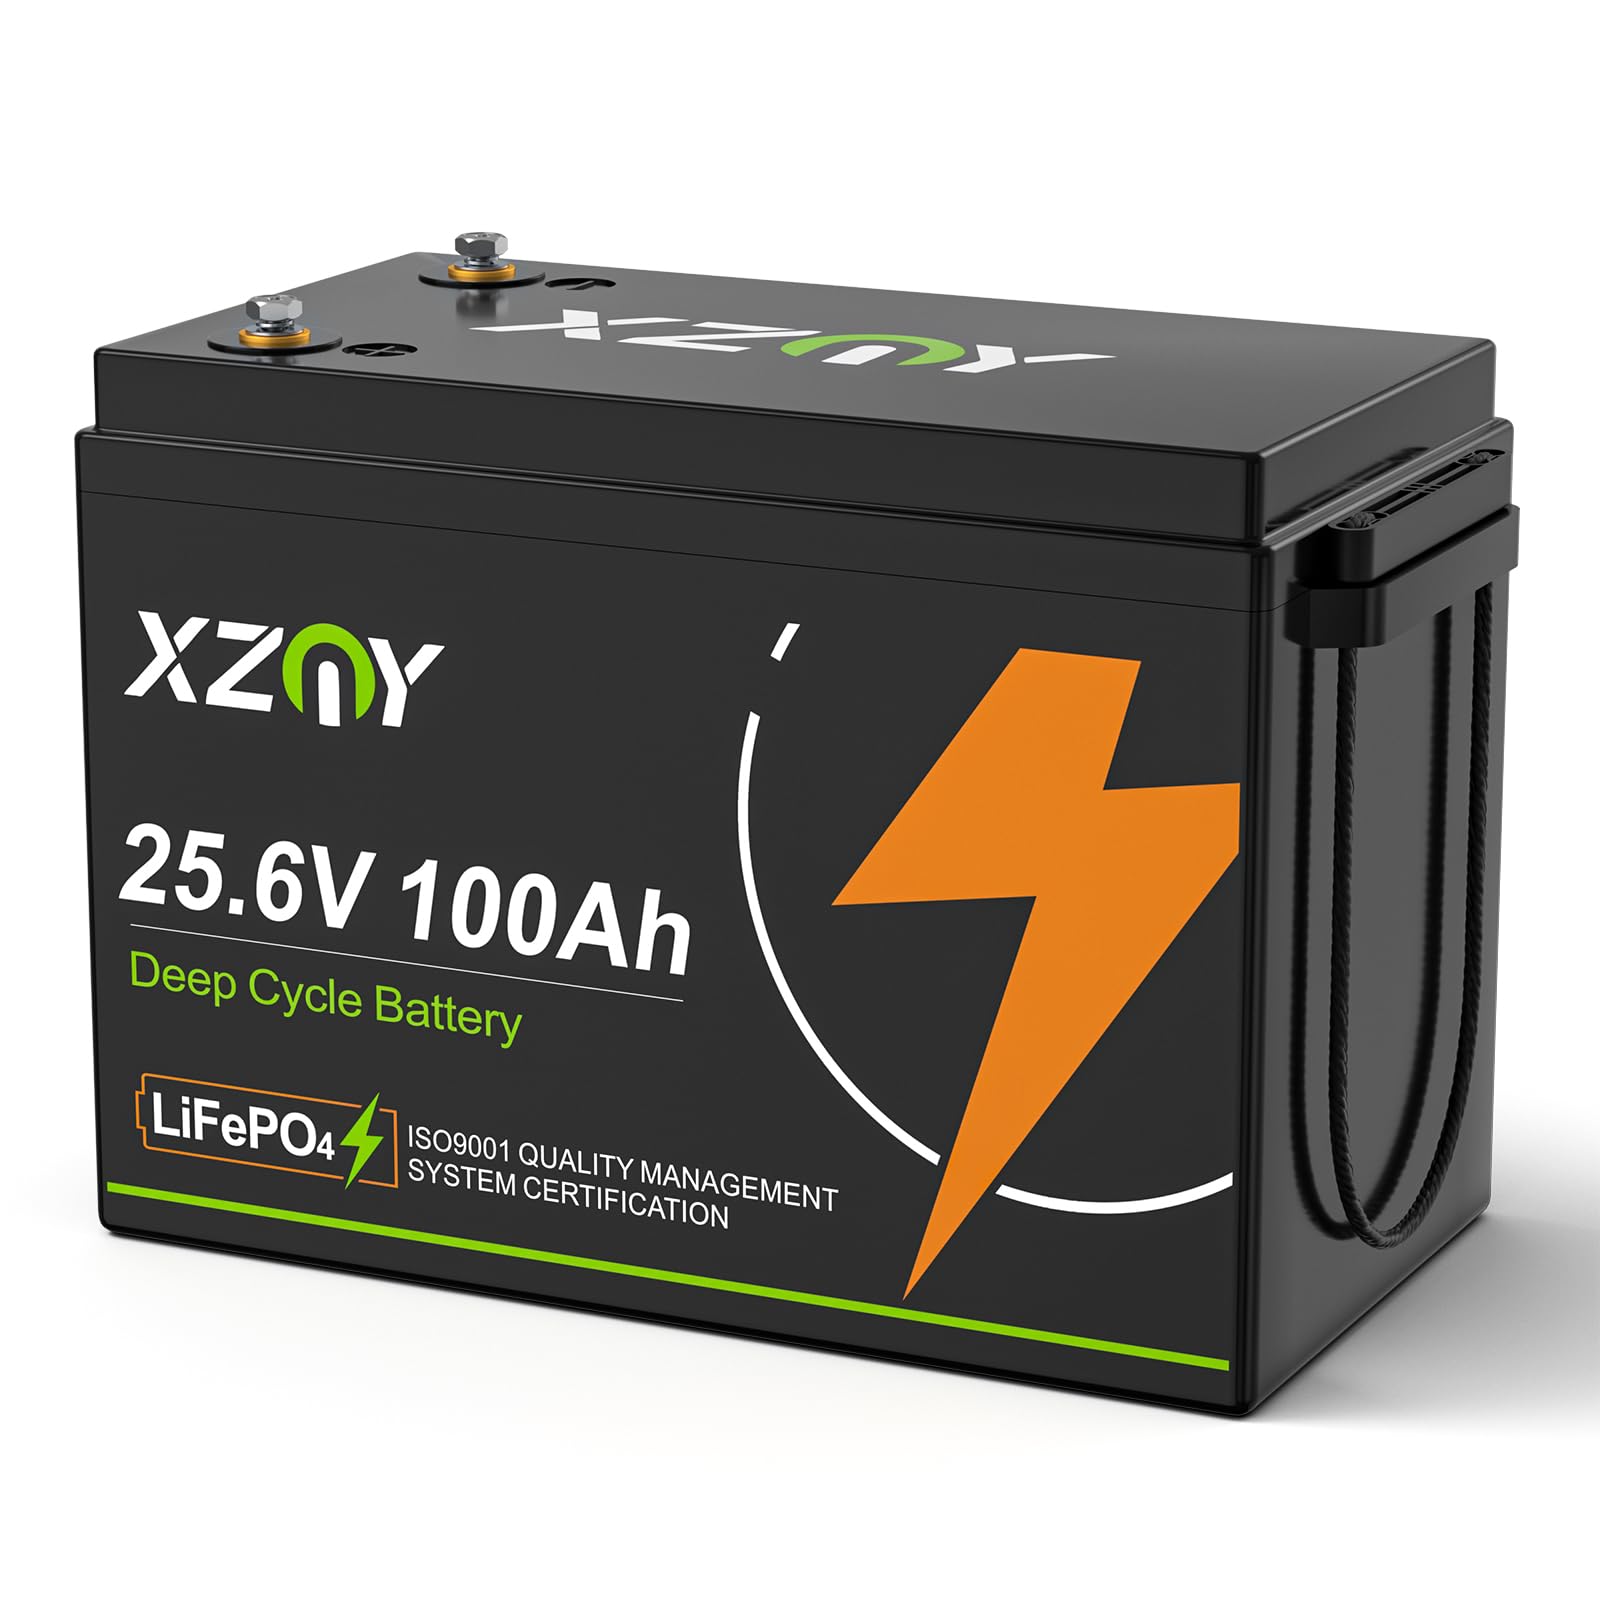 XZNY 24V 100Ah LiFePO4 Lithium Battery, 5000+ Deep Cycles 24V Rechargeable Lithium Battery Built-in 120A BMS, 100Ah LiFePO4 Battery for Trolling Motor, Solar Home, RV, Camping, Backup Power